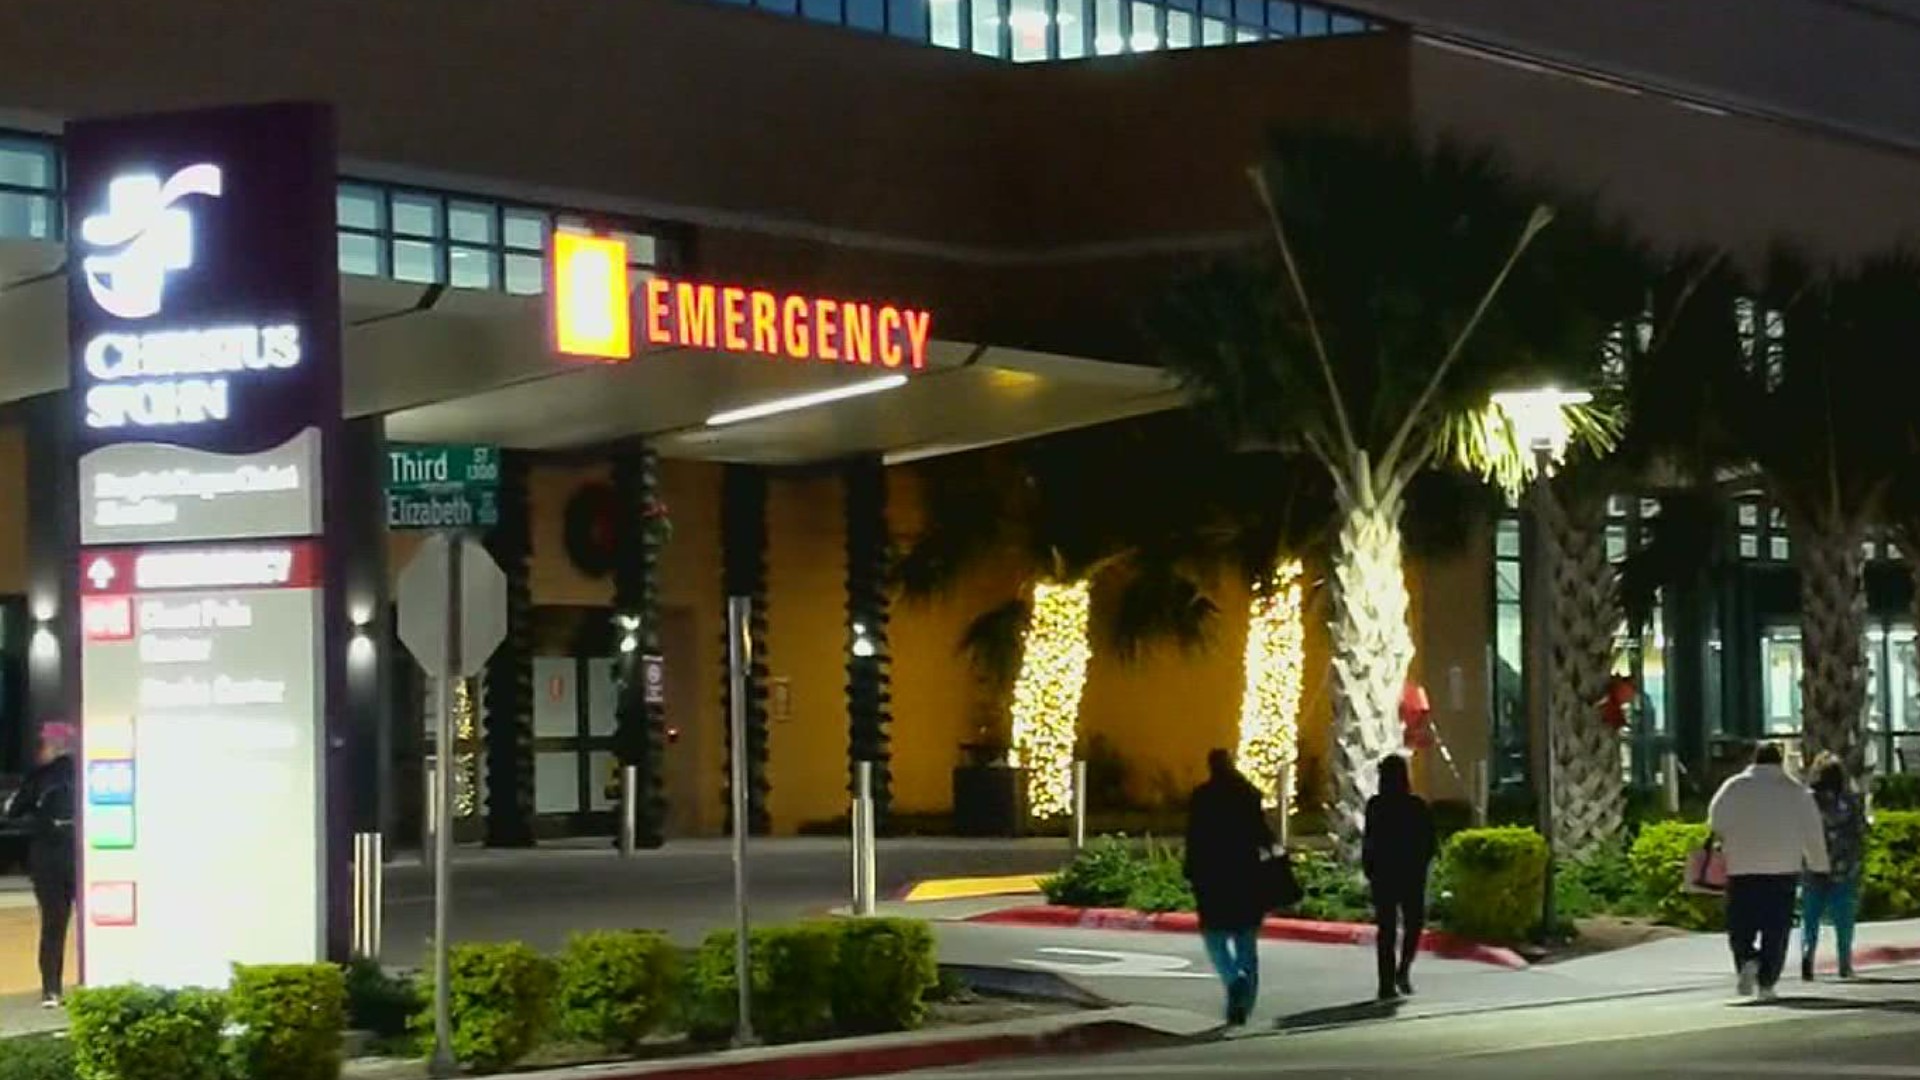 Corpus Christi Mayor Paulette Guajardo said our local hospital systems are working towards opening up additional areas that will accommodate more people.